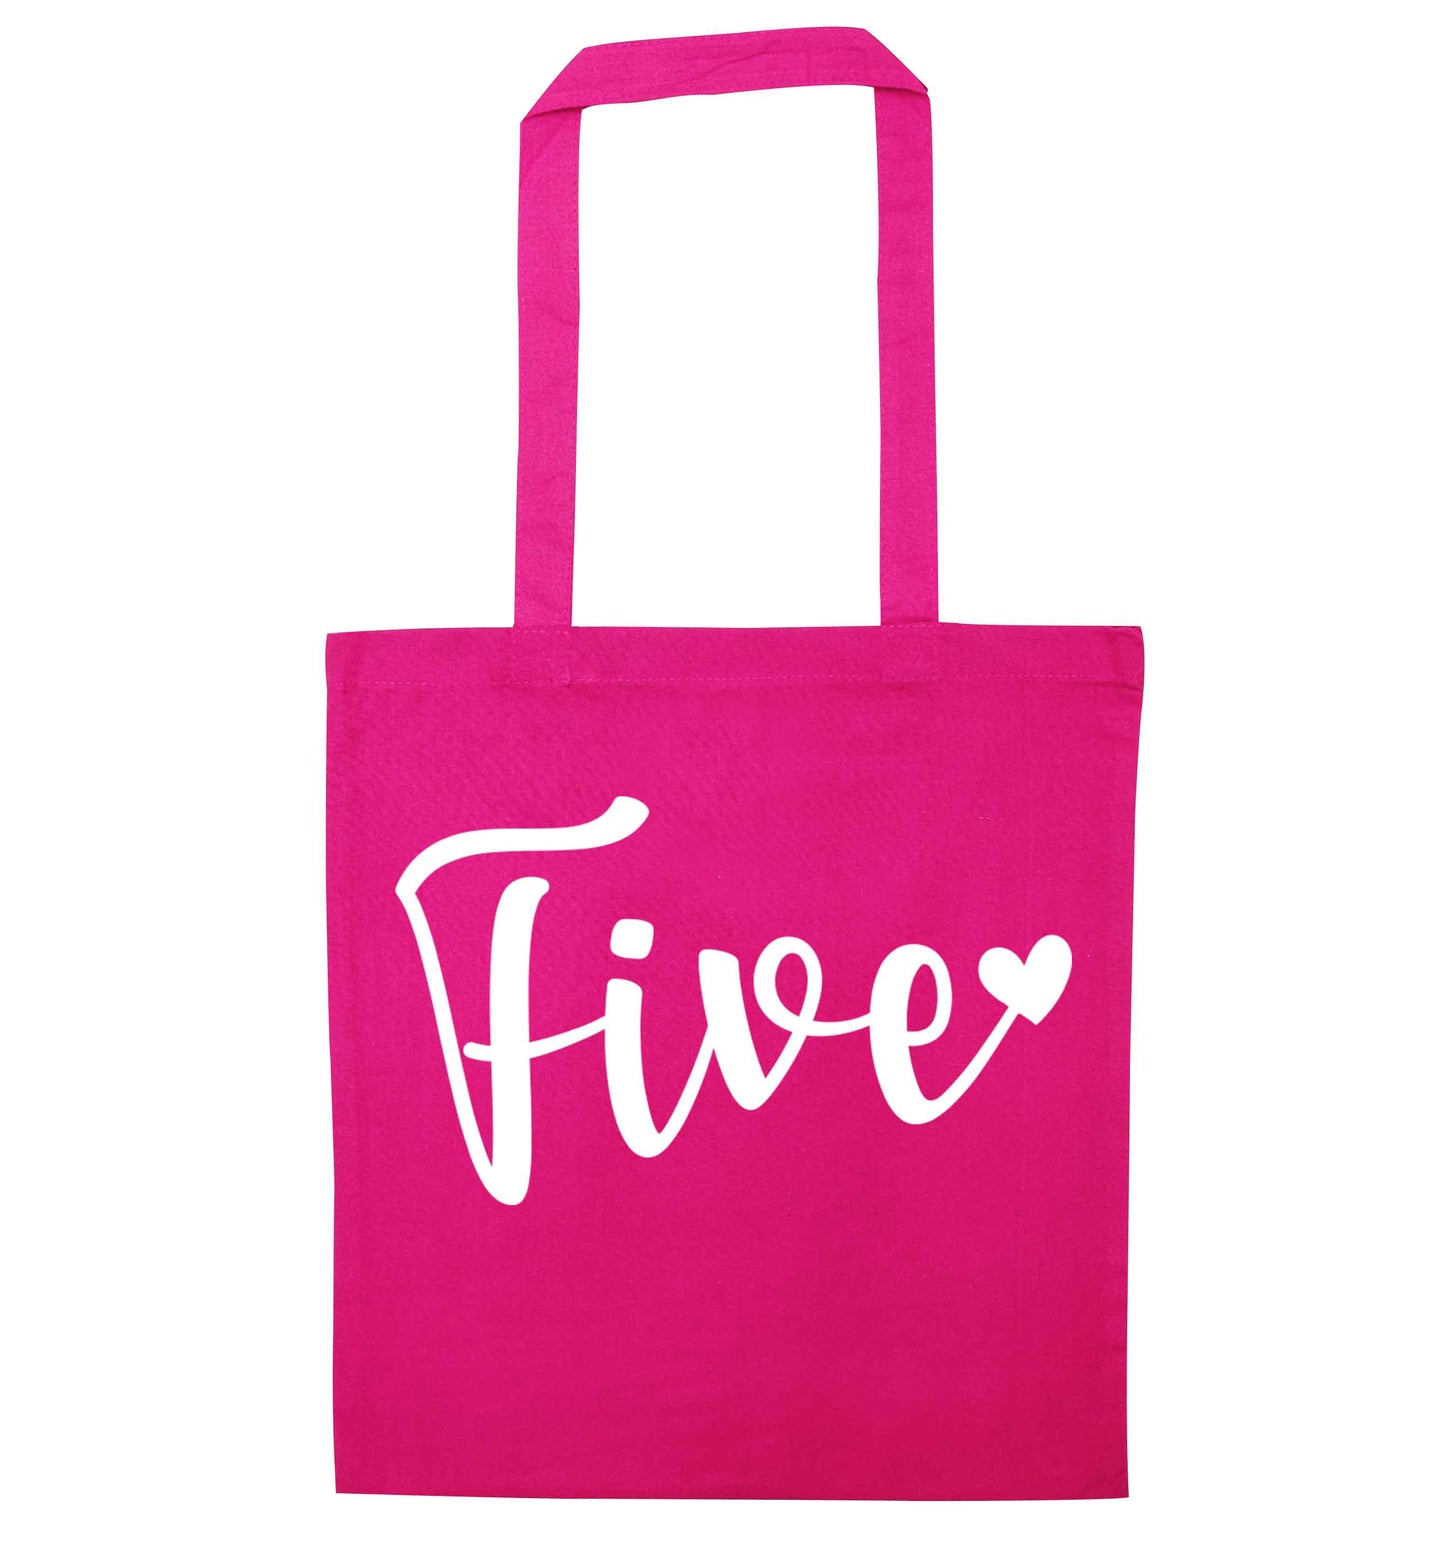 Five and heart pink tote bag